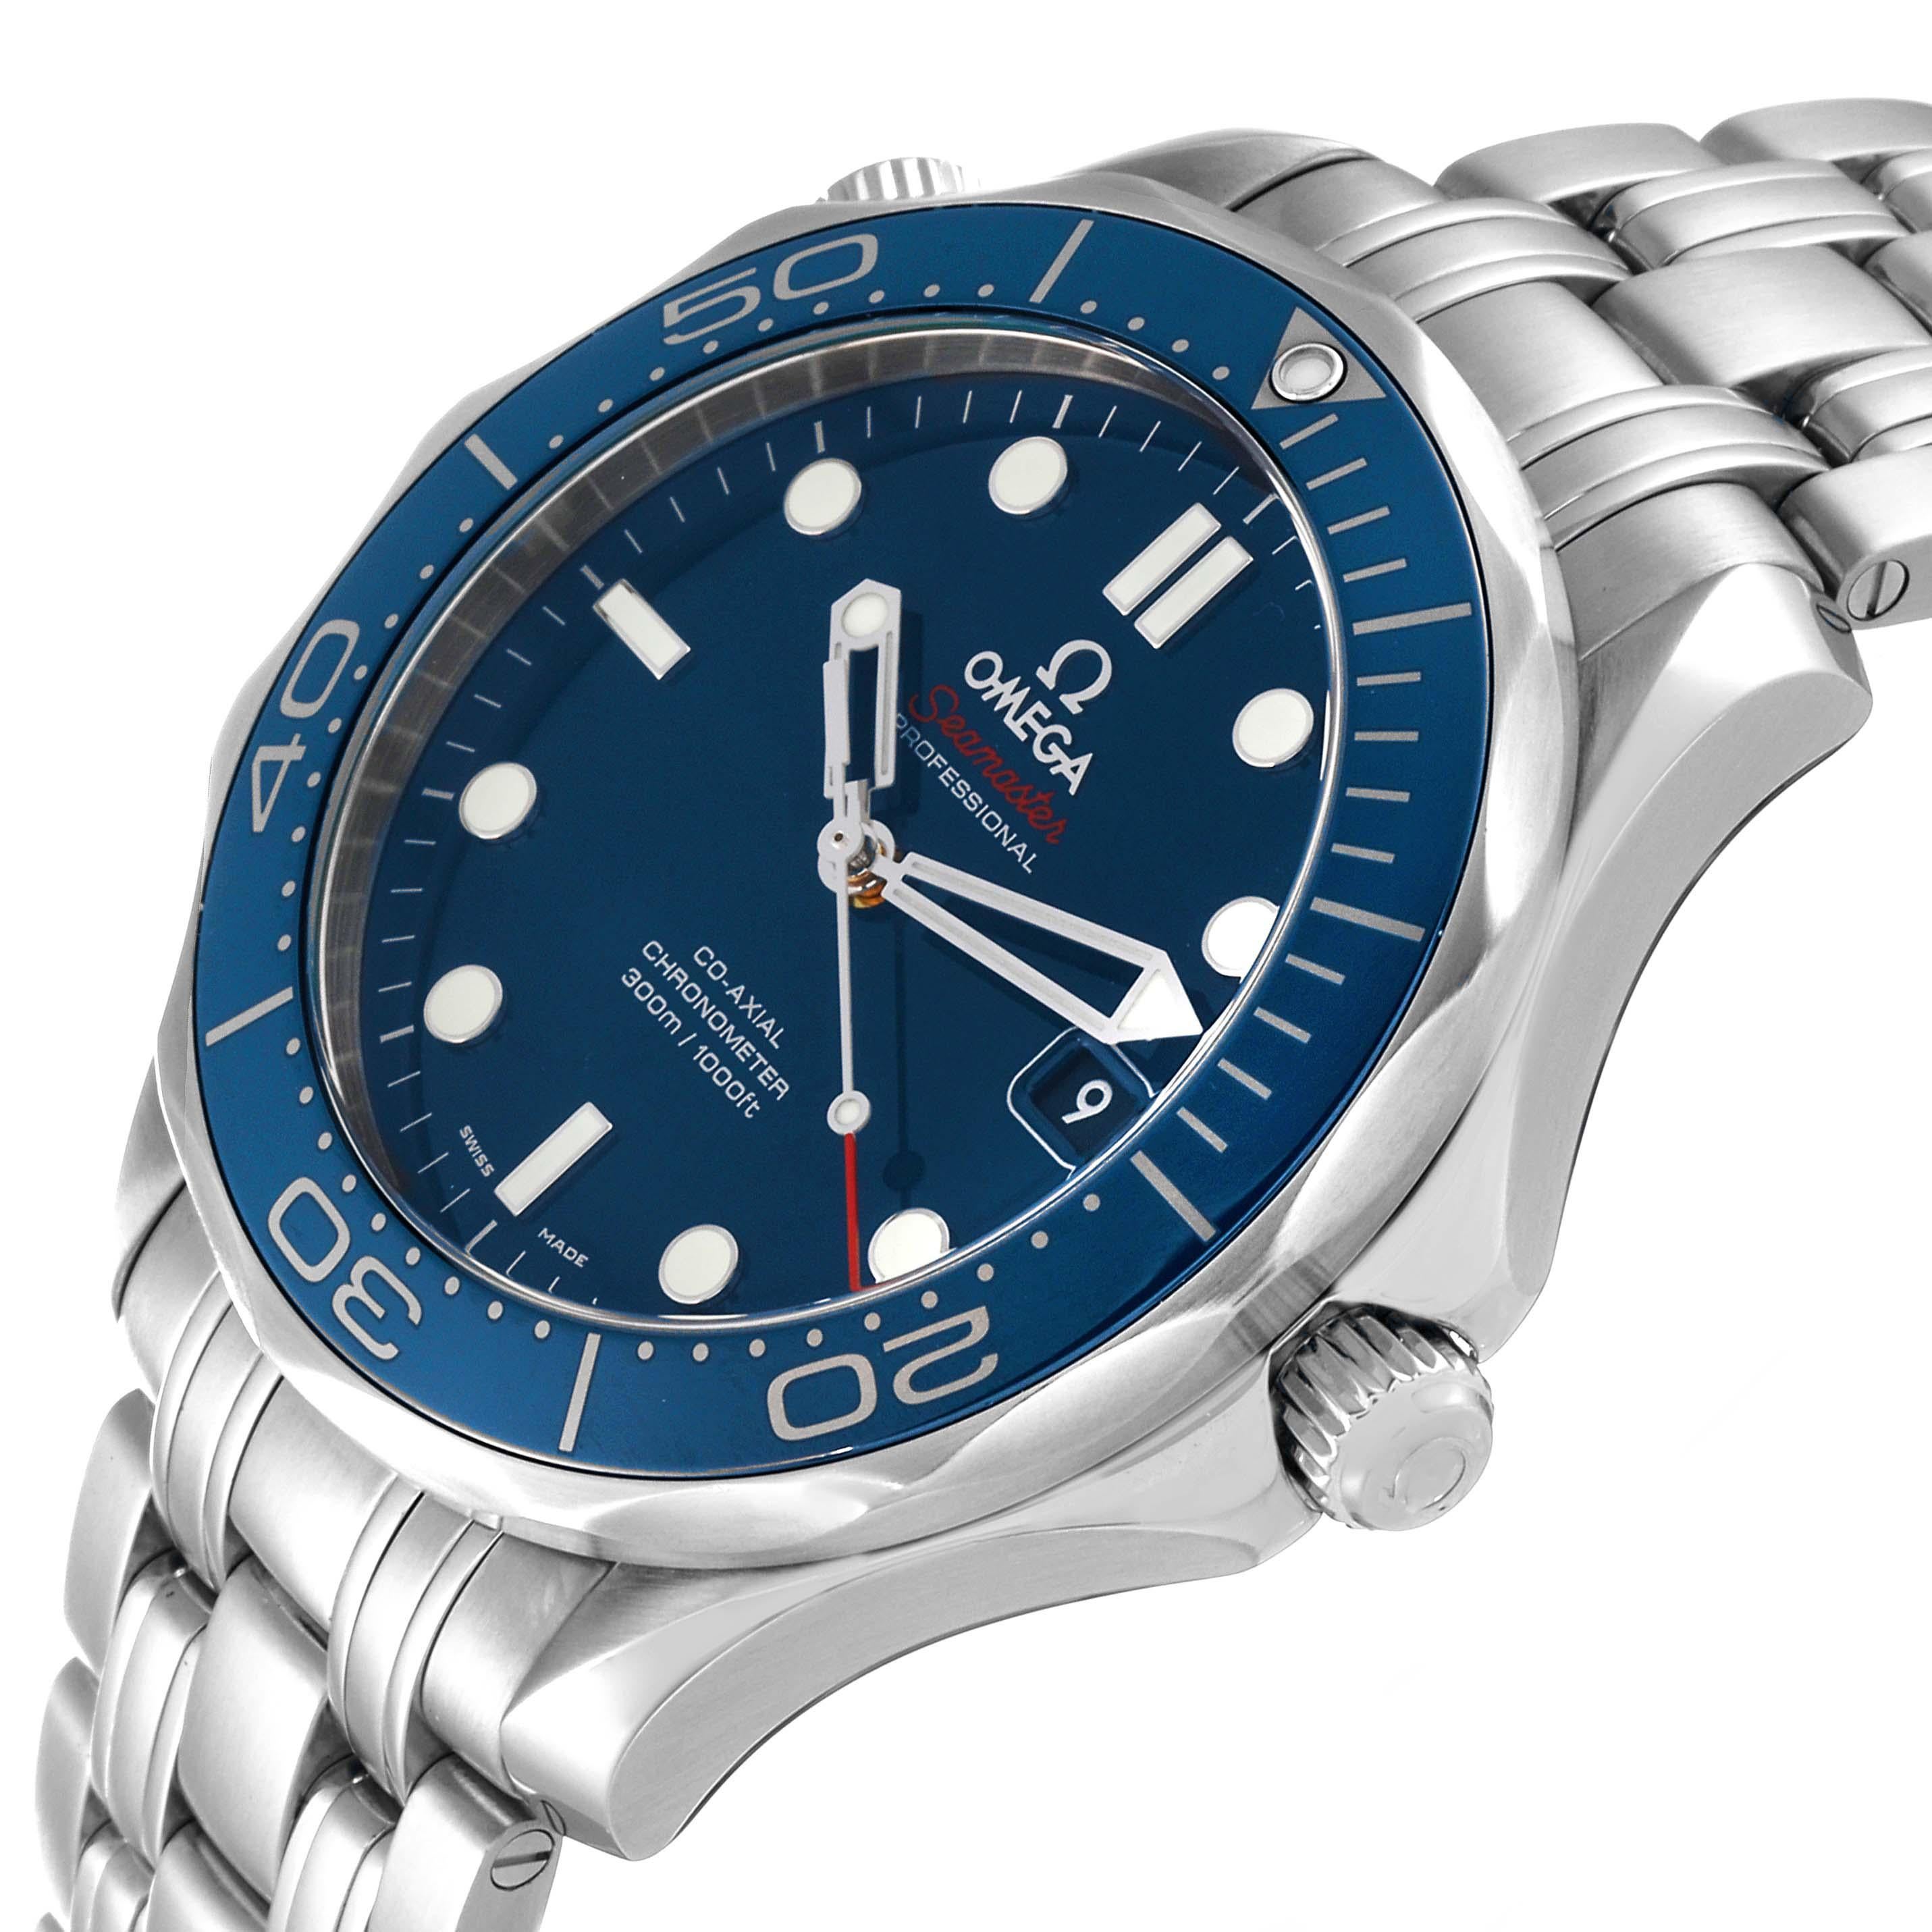 Omega Seamaster Diver 300M Steel Mens Watch 212.30.41.20.03.001 Box Card 1